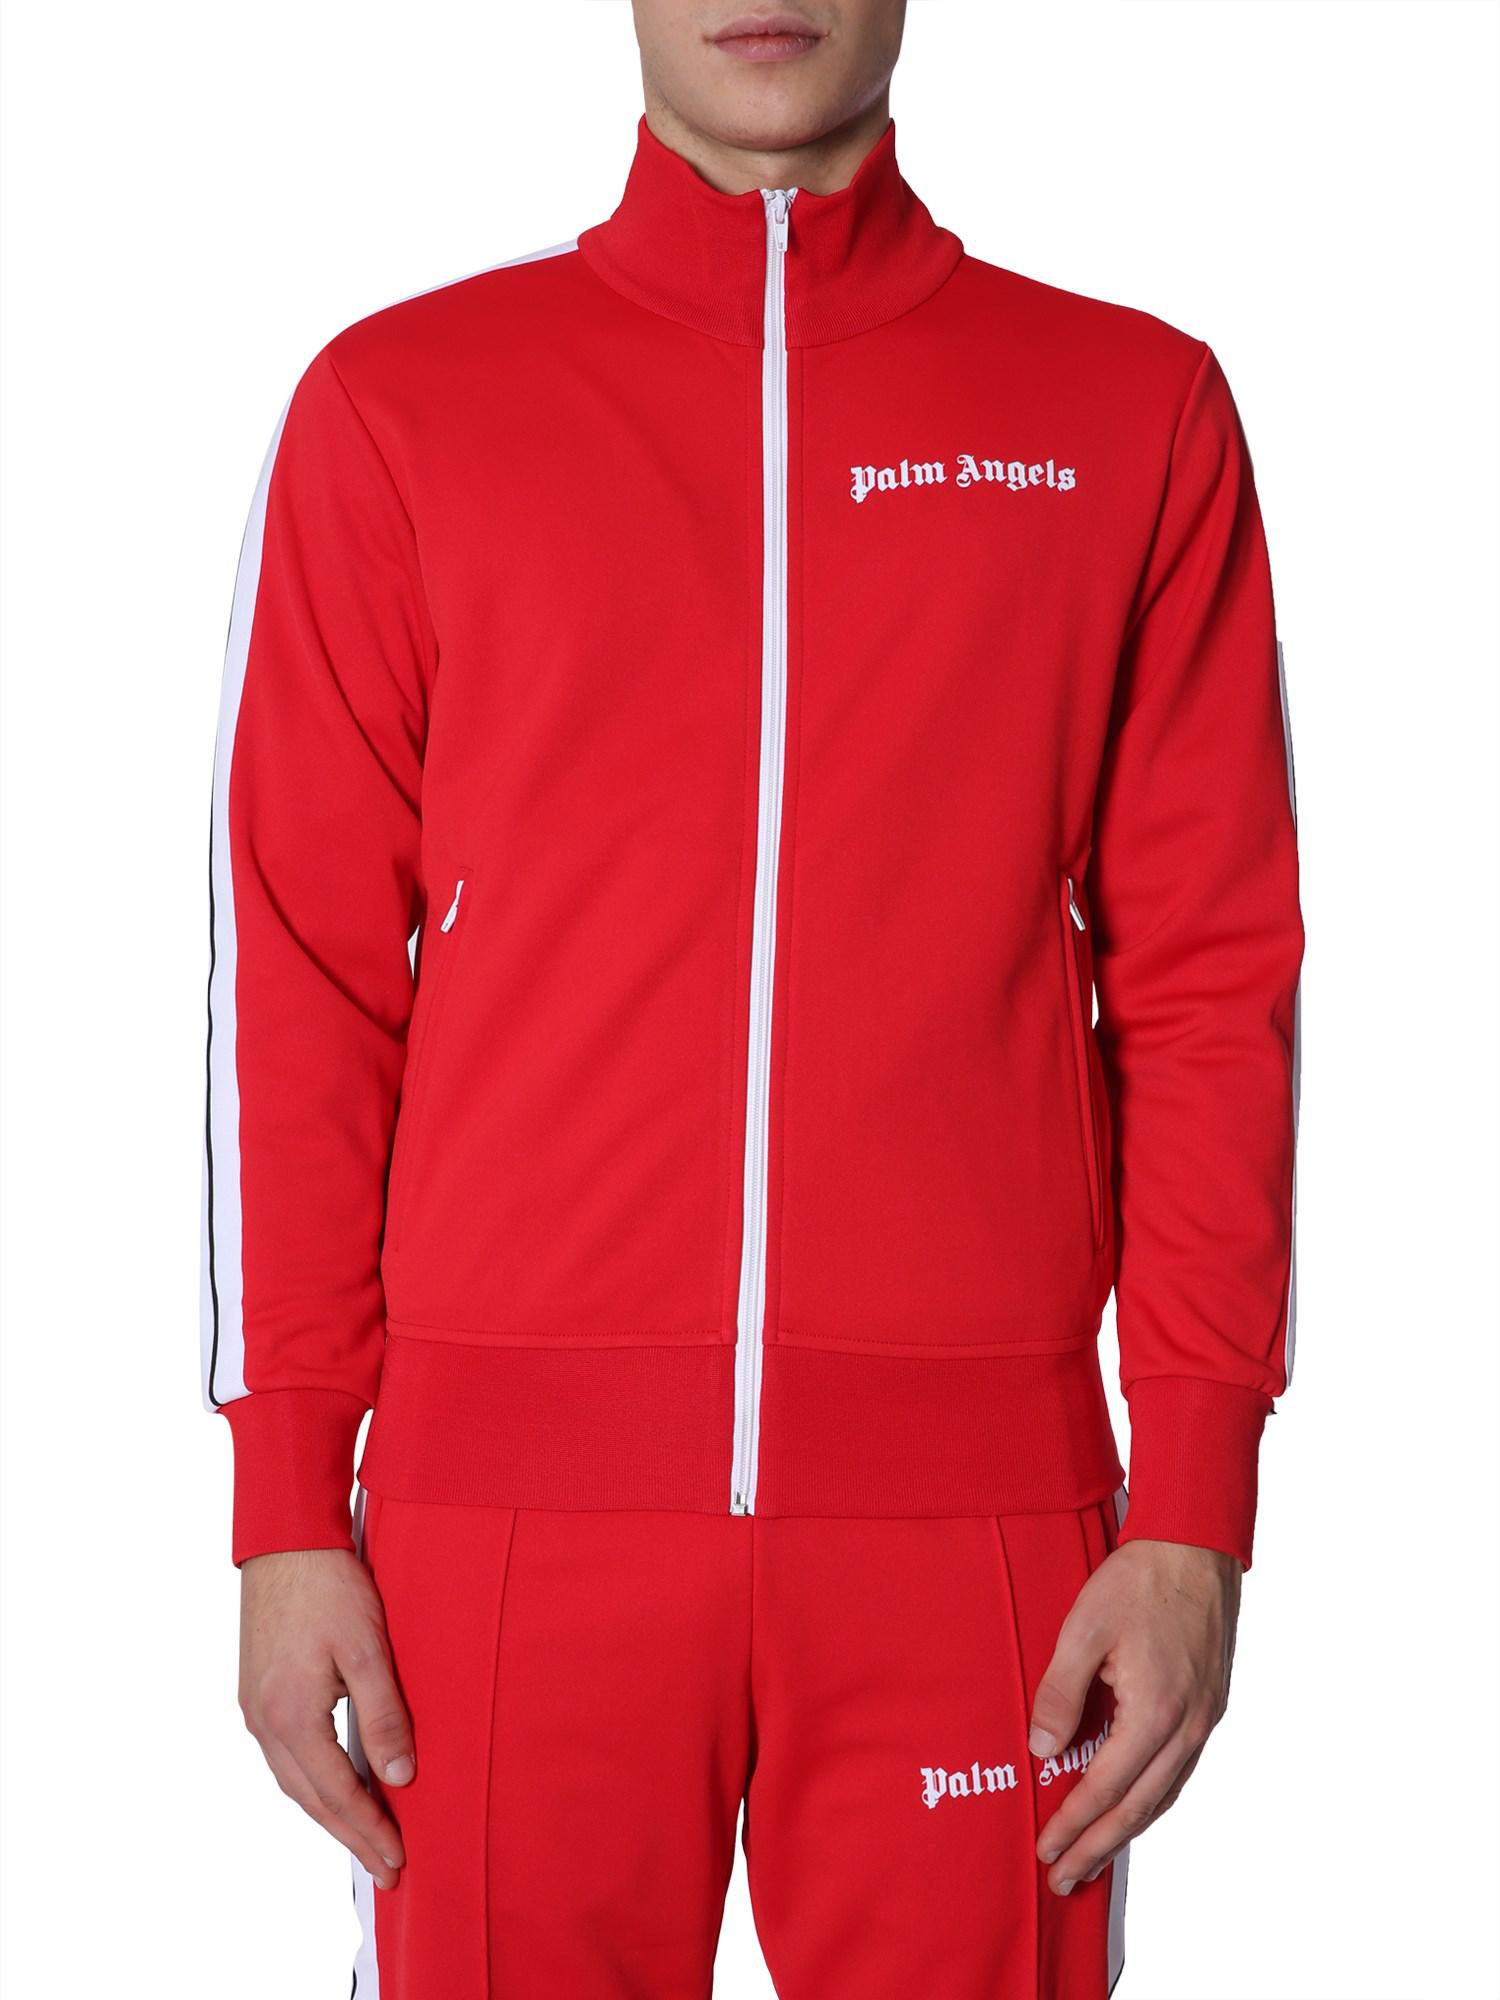 Palm Angels Track Jacket With Contrasting Band in Red for Men - Lyst